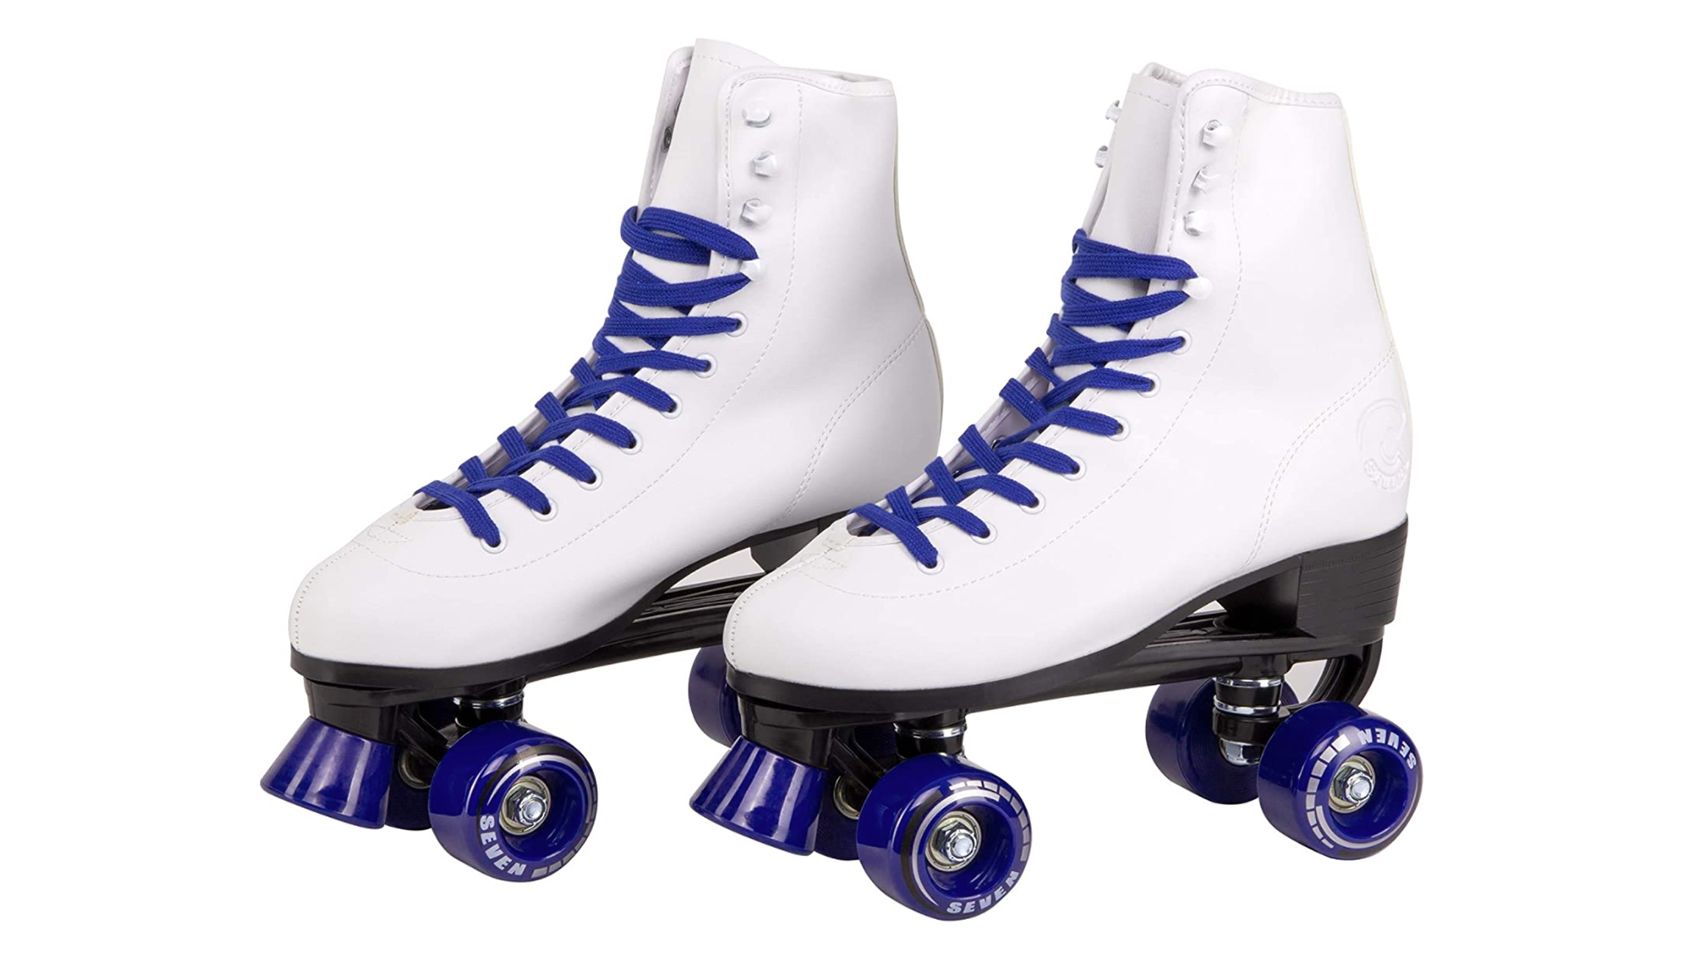 Isaa Miilne Skates Soft Faux Leather Skates Perfect Men Women Cool Pepper Mint